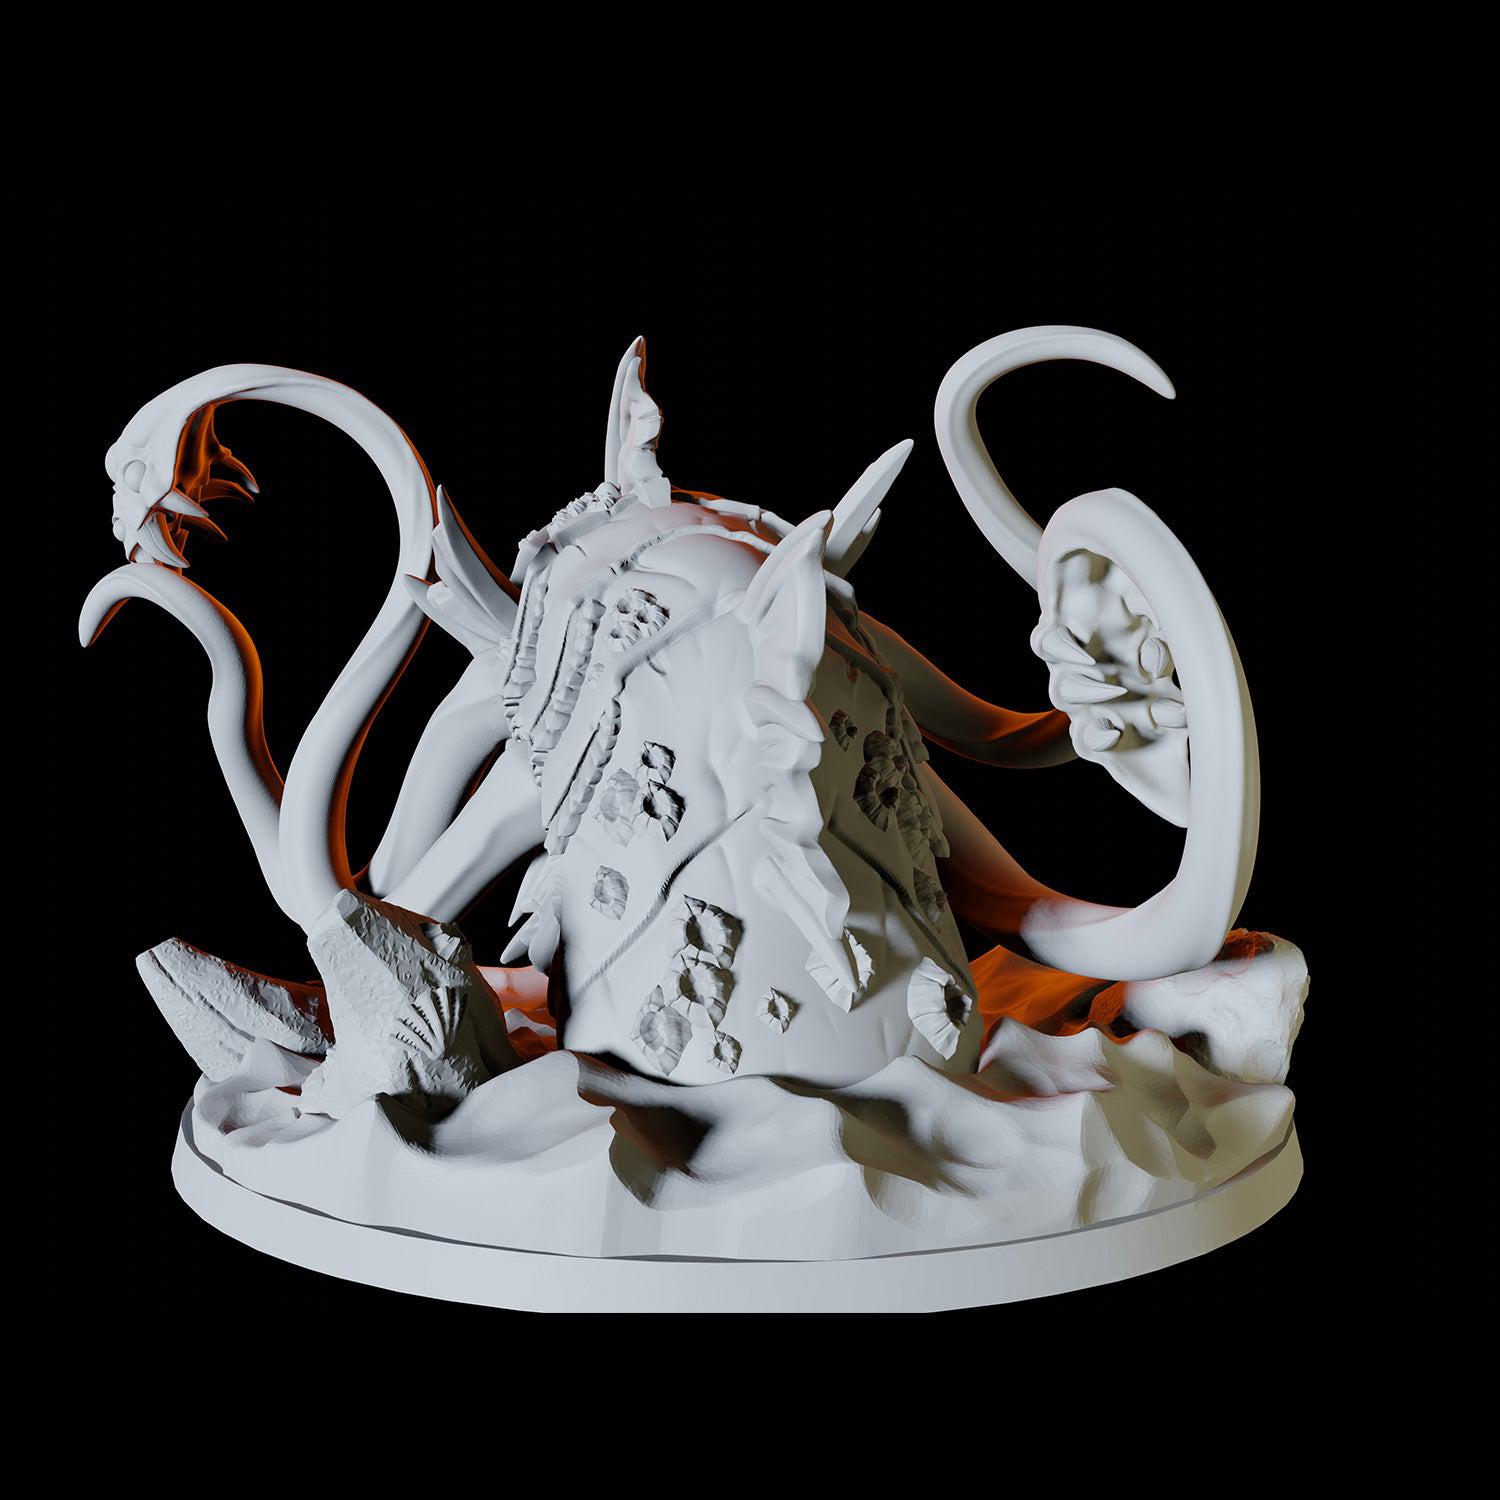 Aboleth or Kraken Miniature for Dungeons and Dragons - Myth Forged